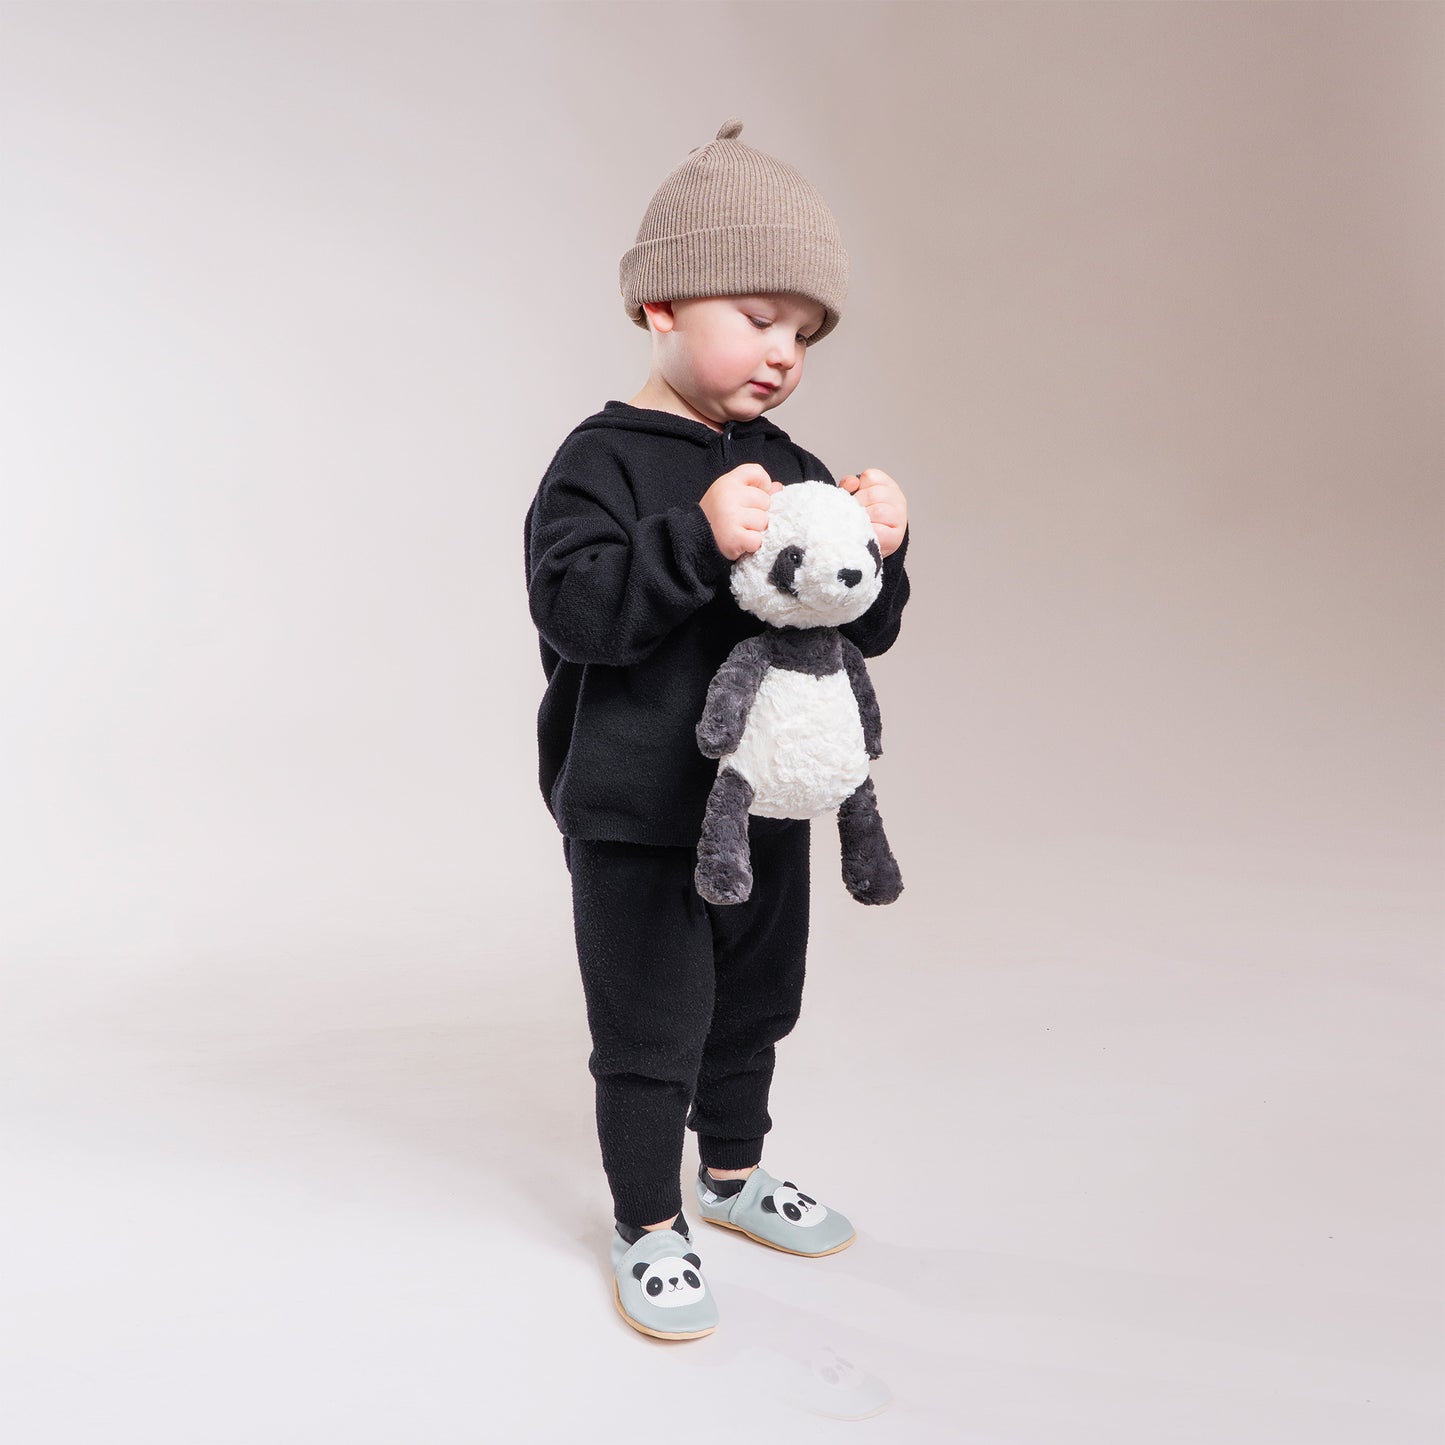 Soft Leather Baby Panda Shoes